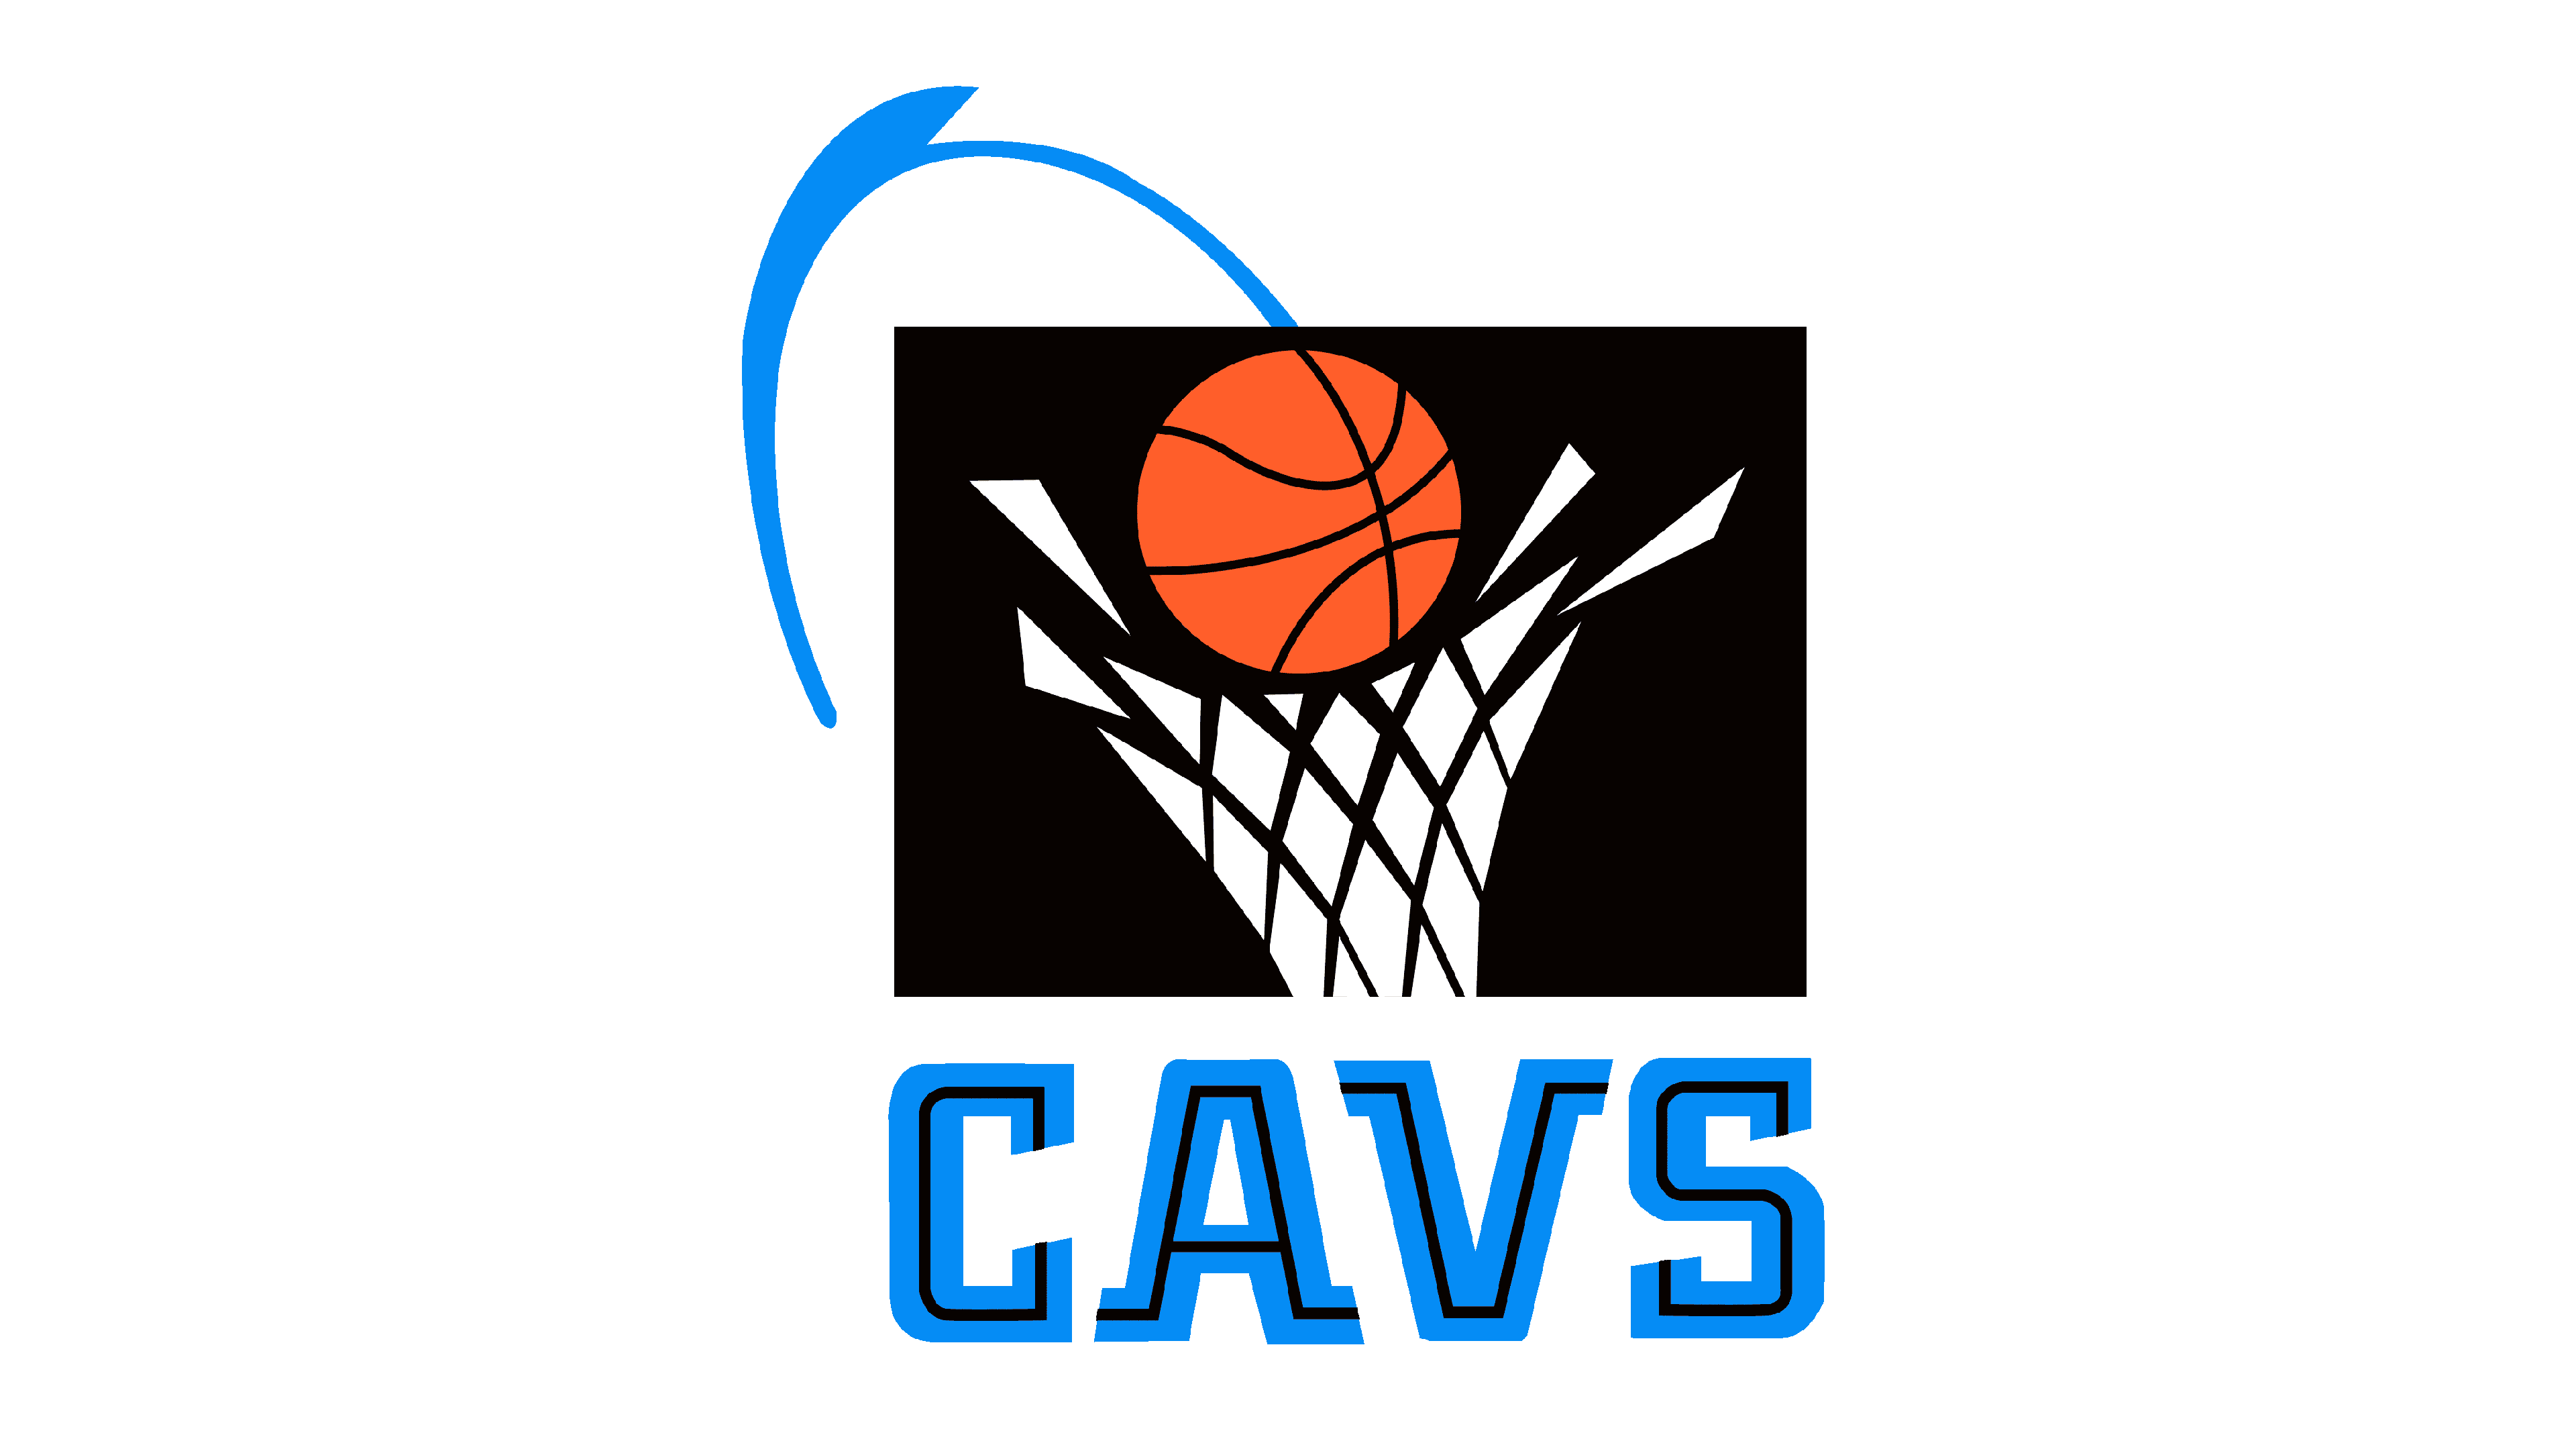 Cavs have new logos and a slight color change (and will have new